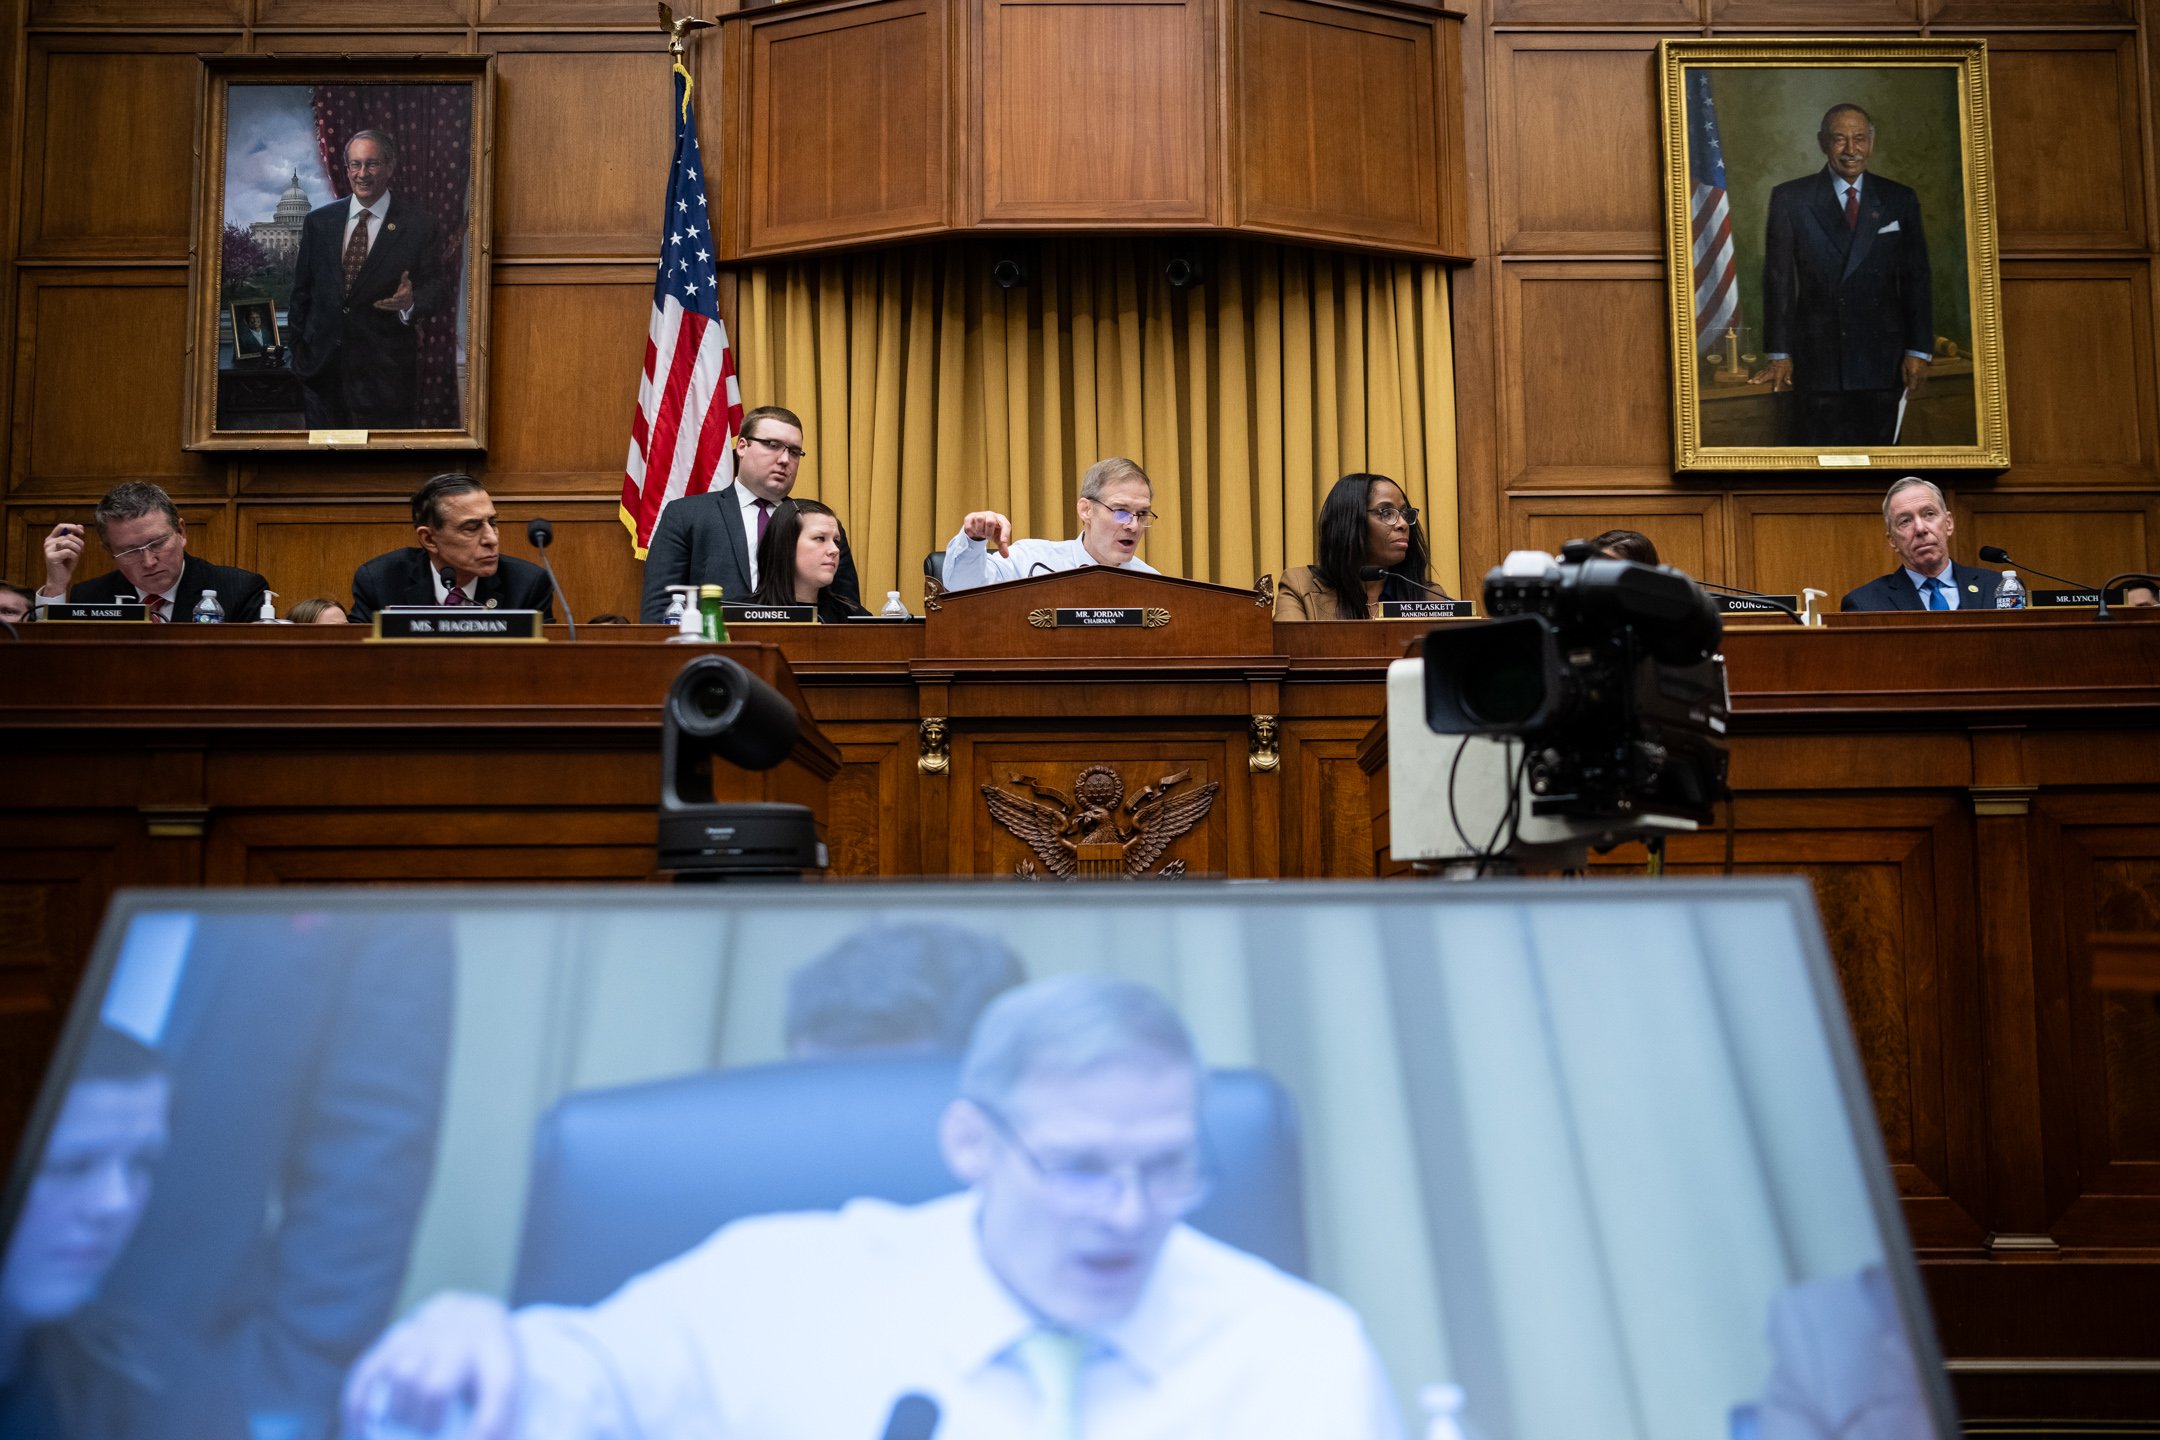  Representative Jim Jordan (R-OH), Committee and Subcommittee Chair, speaks during a House Judiciary Select Subcommittee hearing on the Weaponization of the Federal Government, at the U.S. Capitol, in Washington, D.C., on February 9, 2023. (Graeme Sl